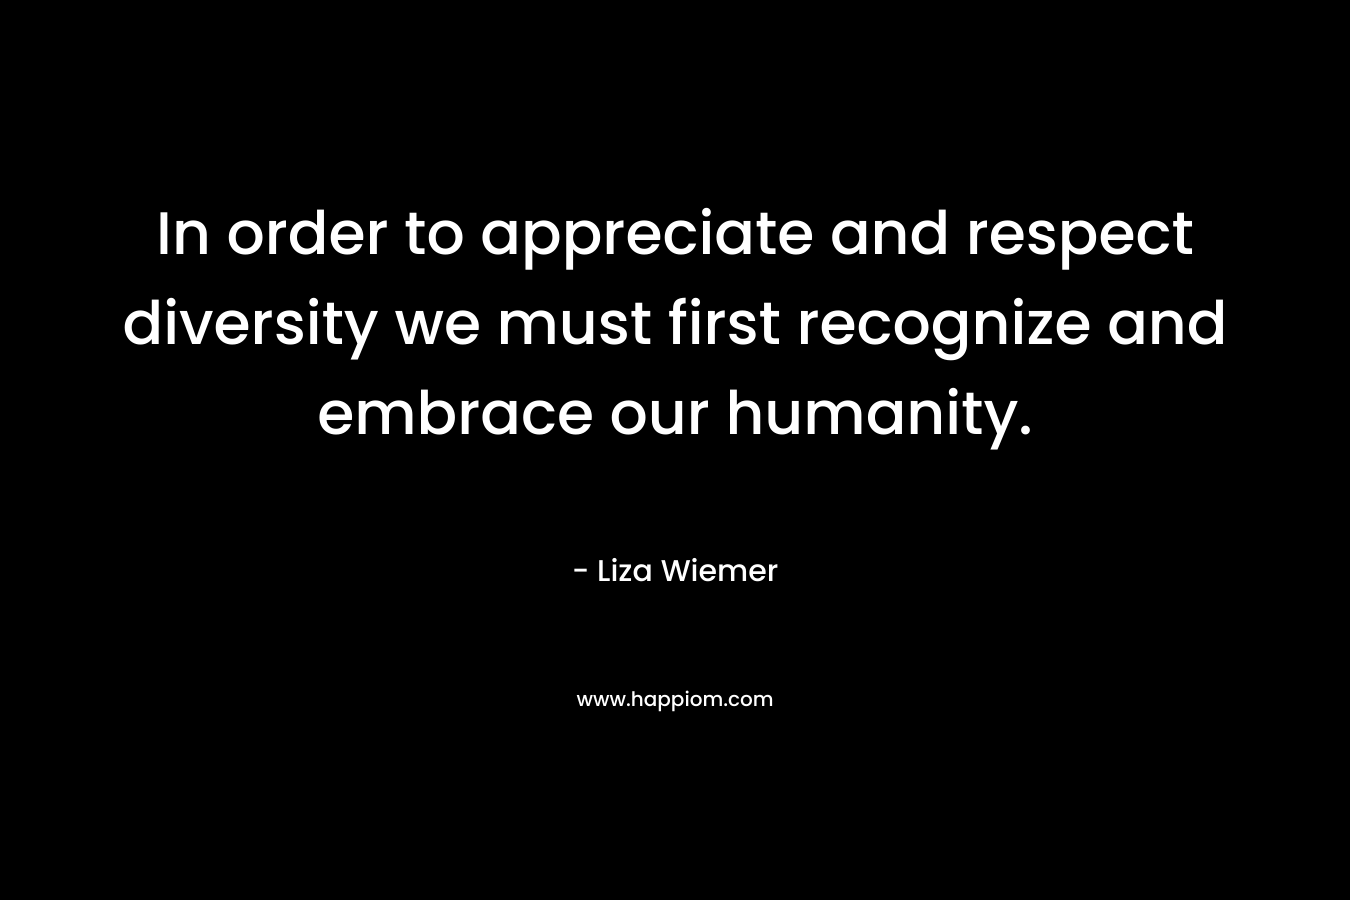 In order to appreciate and respect diversity we must first recognize and embrace our humanity. – Liza Wiemer